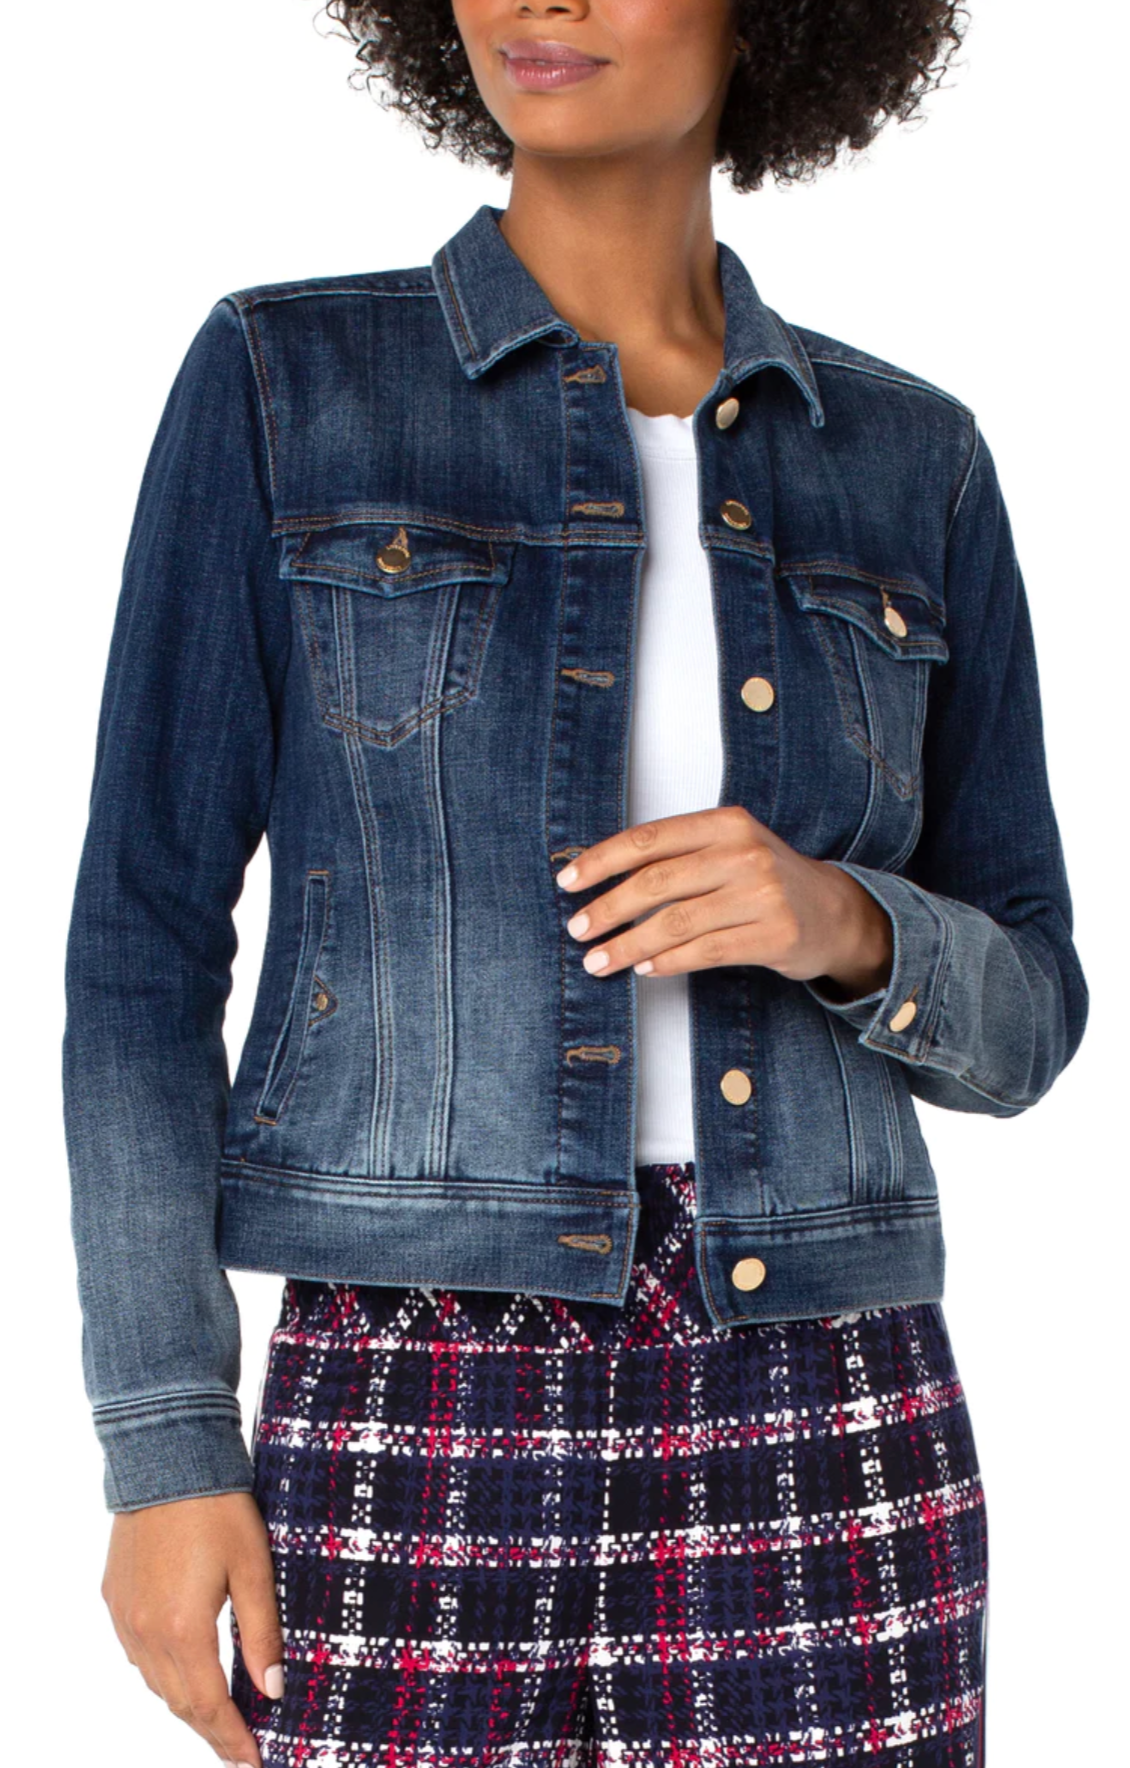 Classic Jean Jacket - The French Shoppe